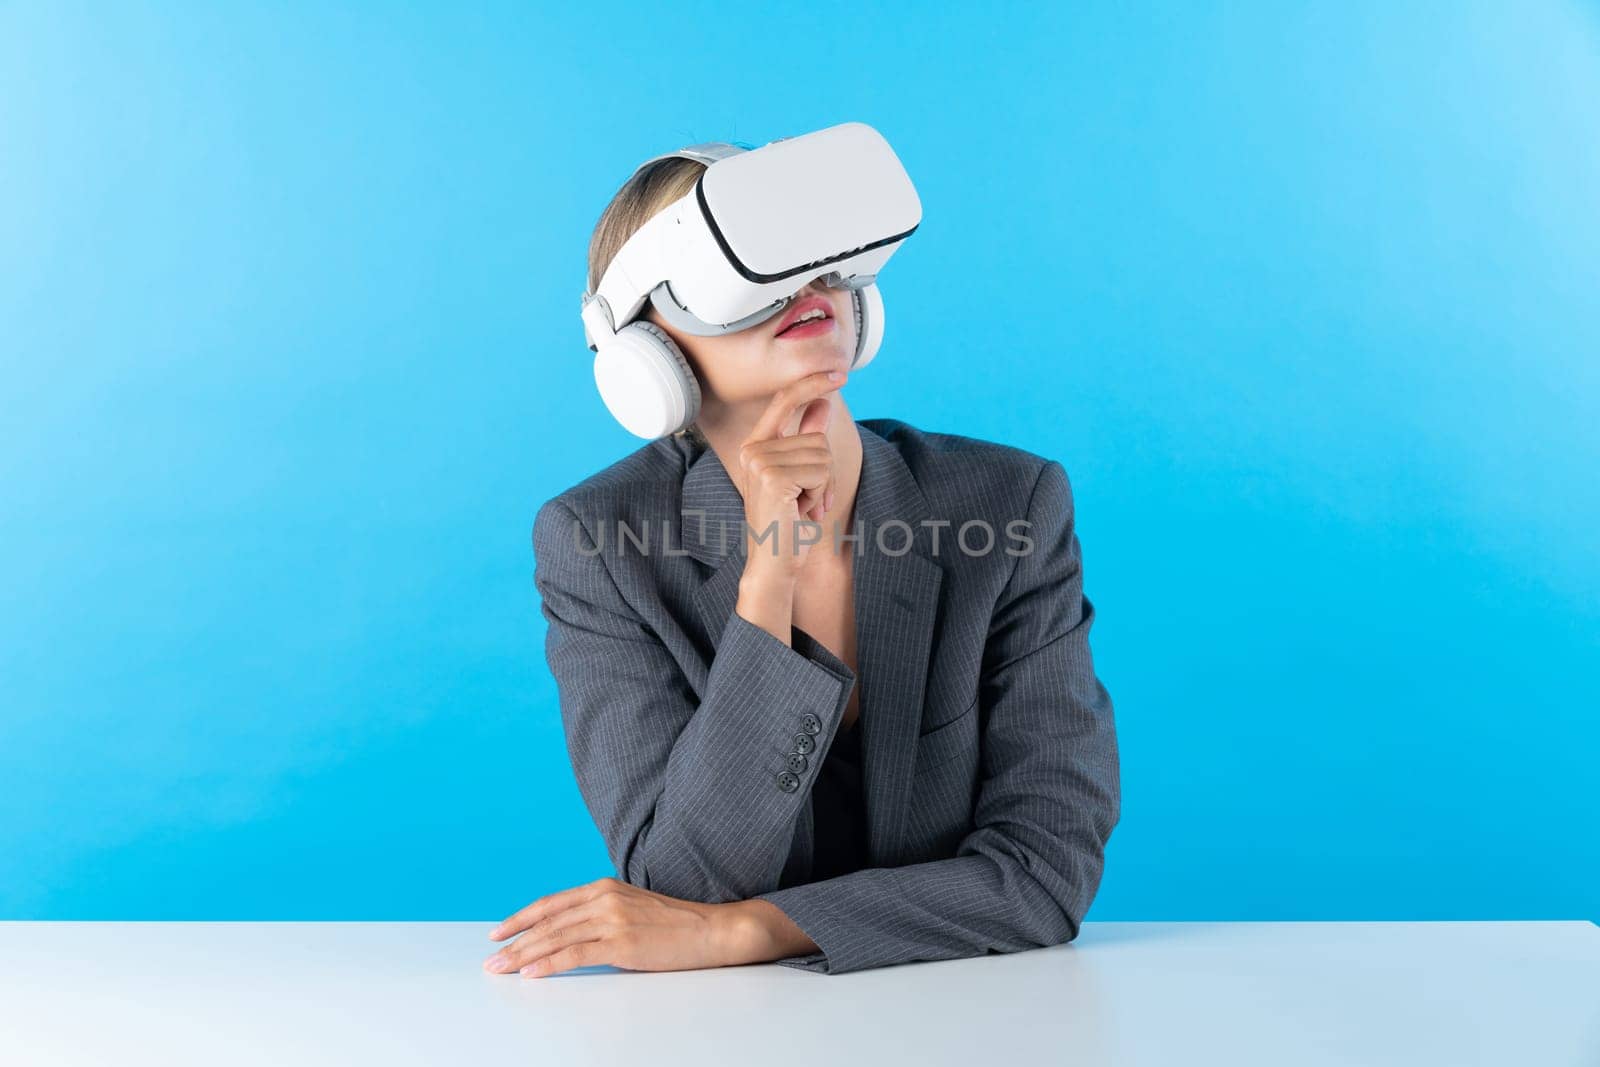 Smart project manager wearing VR glasses while sitting and thinking about marketing plan. Skilled business woman using visual reality goggles and sitting at blue background. Innovation. Contraption.